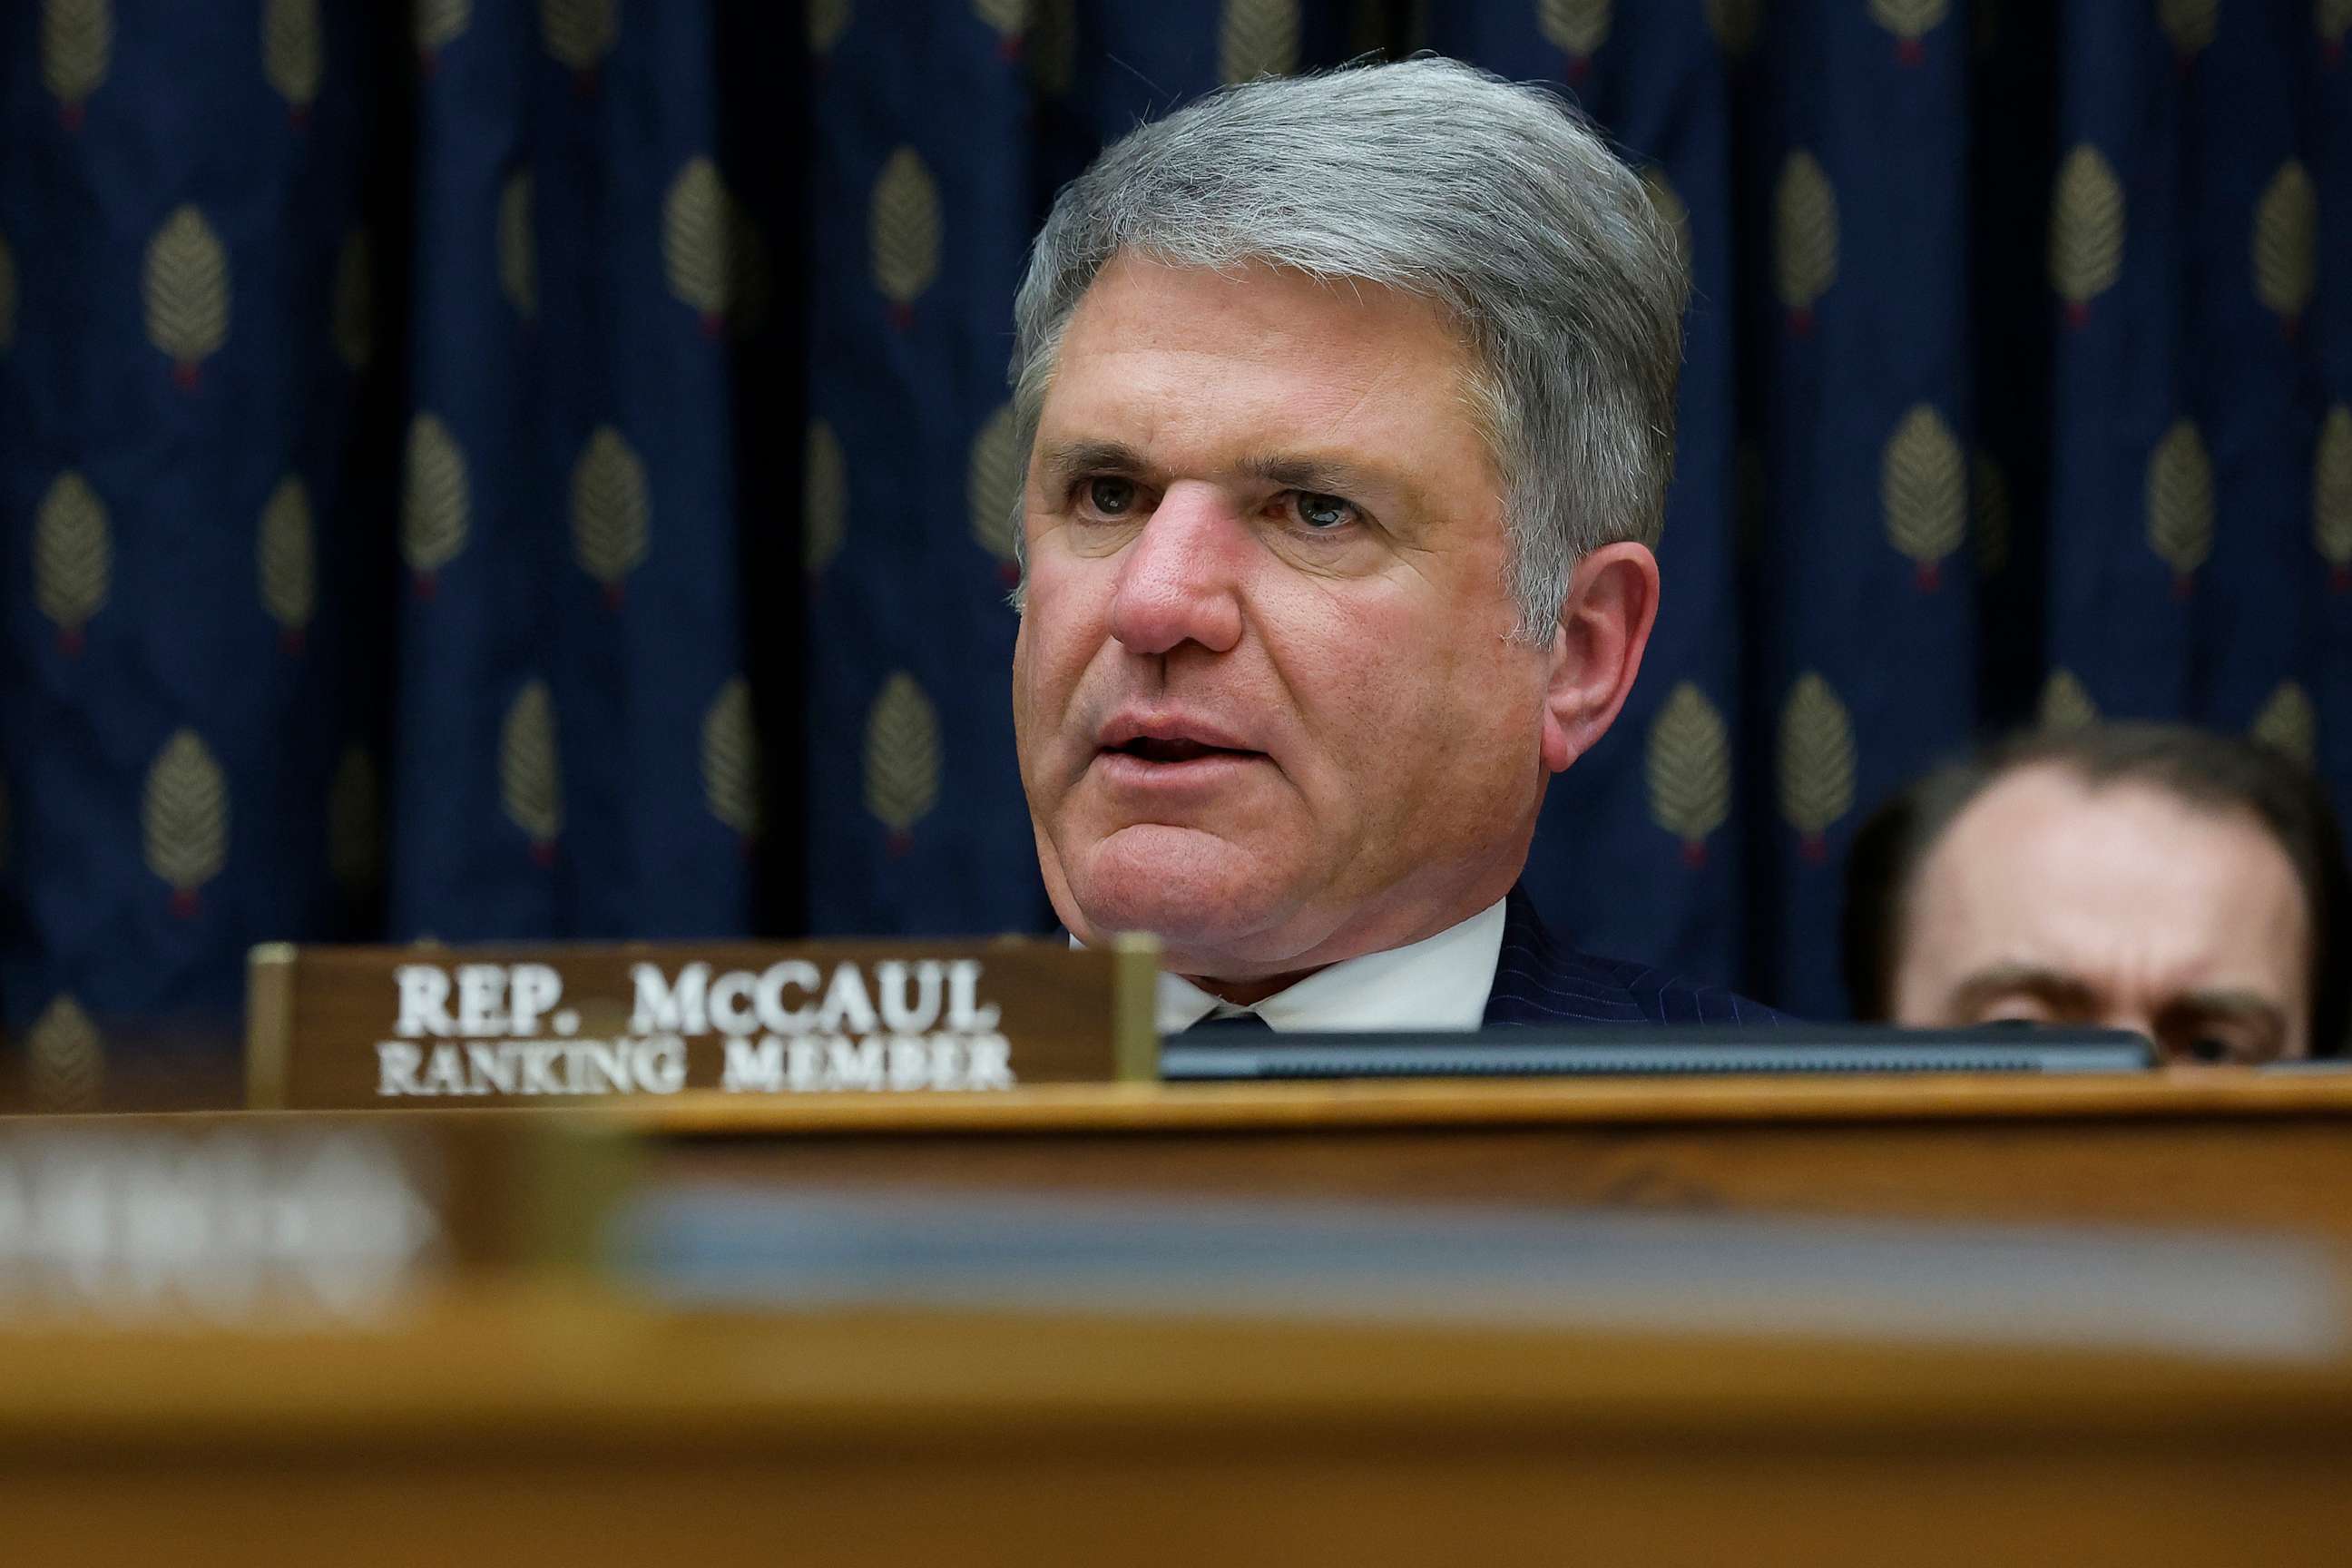 PHOTO: Rep. Mike McCaul during a hearing on Capitol Hill on April 28, 2022 in Washington, D.C.